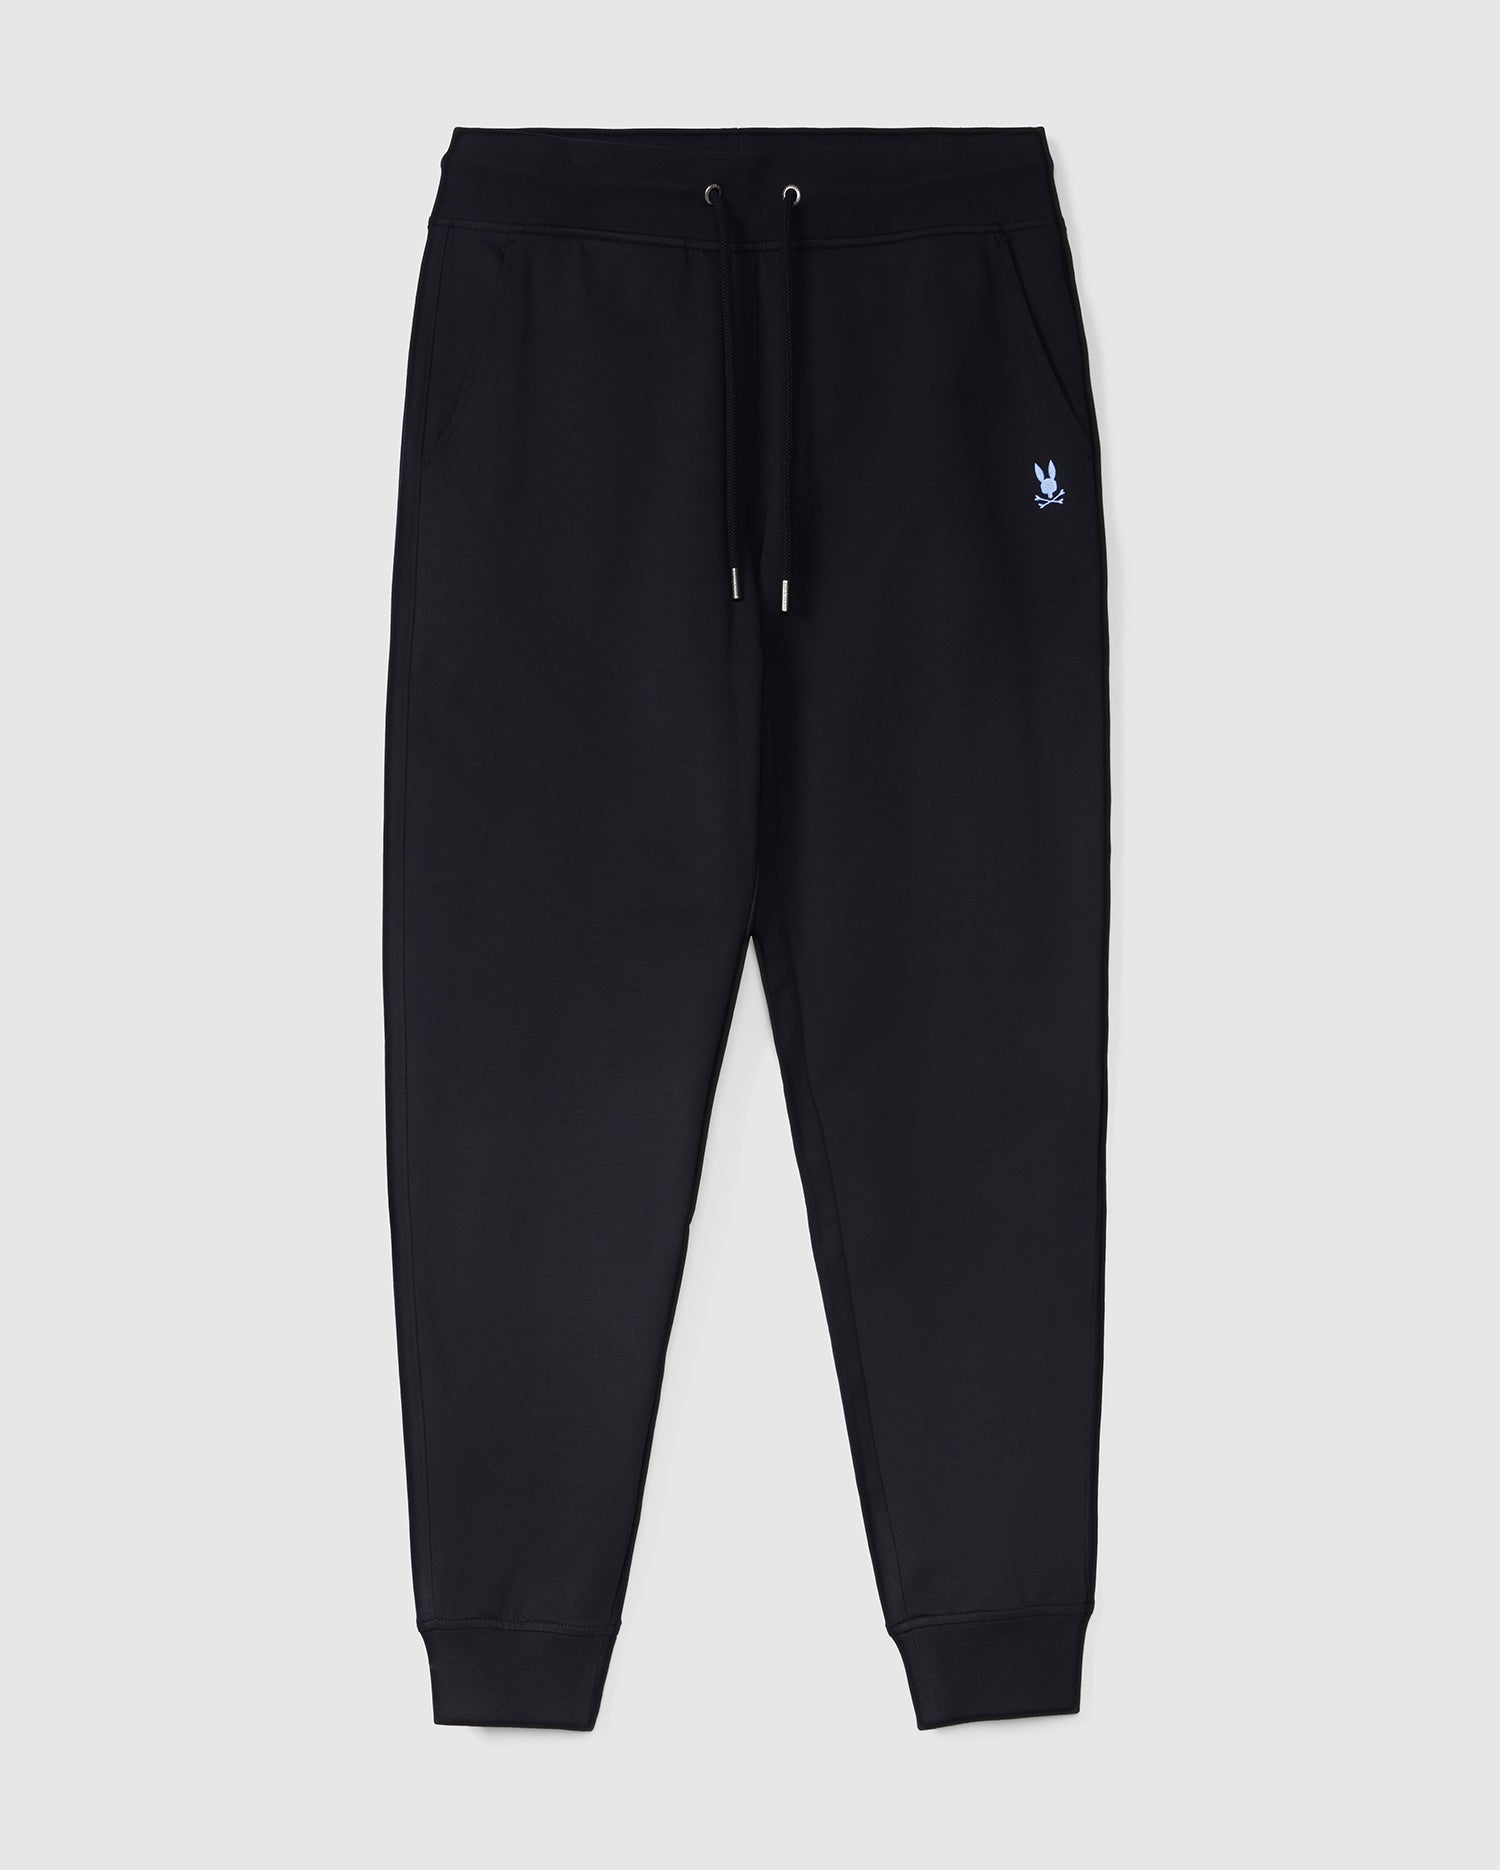 Psycho Bunny Men's Sweatpants Collection Comfy and Stylish